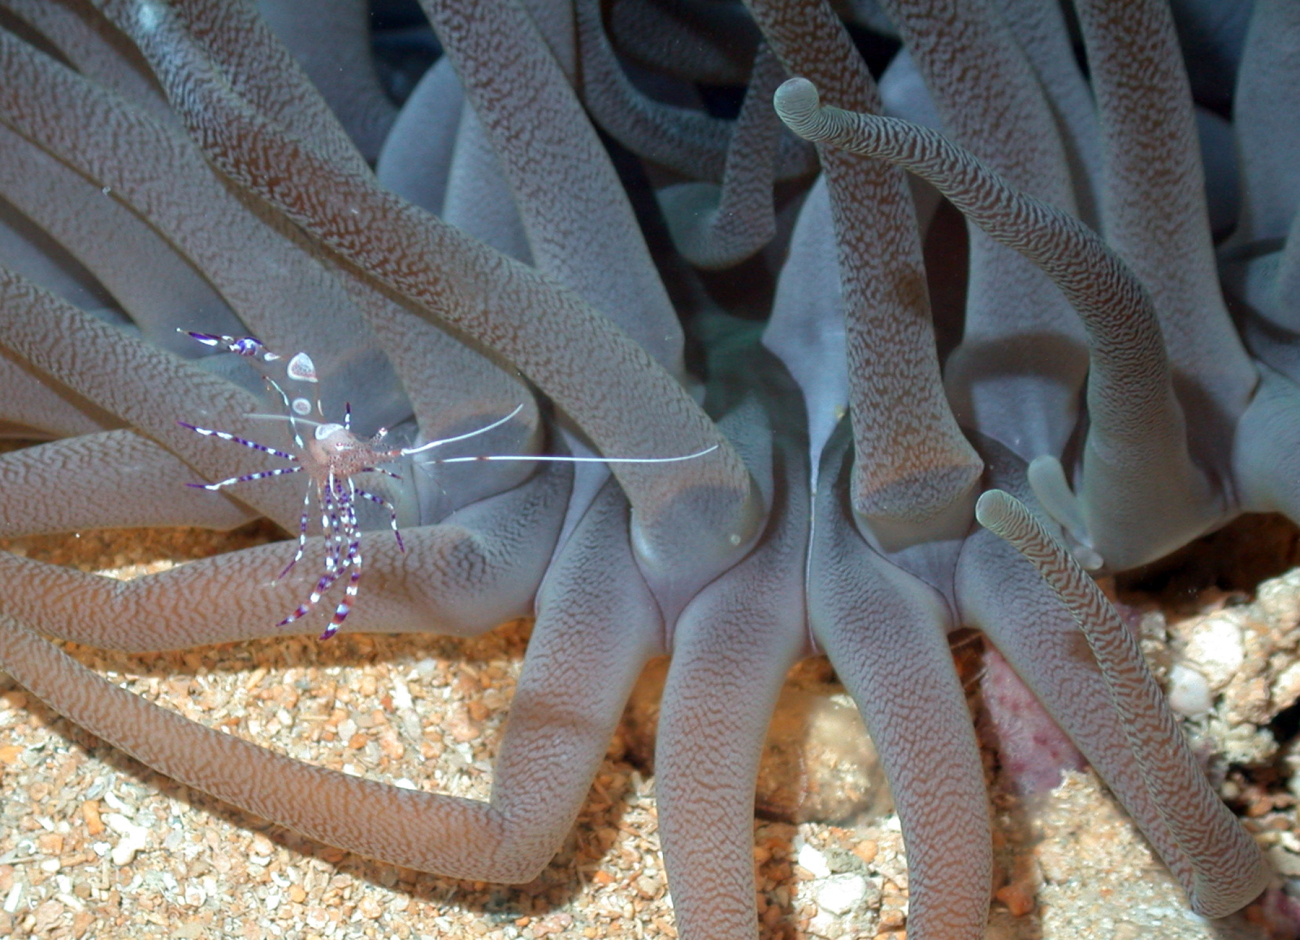 A Pedersen's cleaner shrimp hanging out in the tentacles of a large anemone